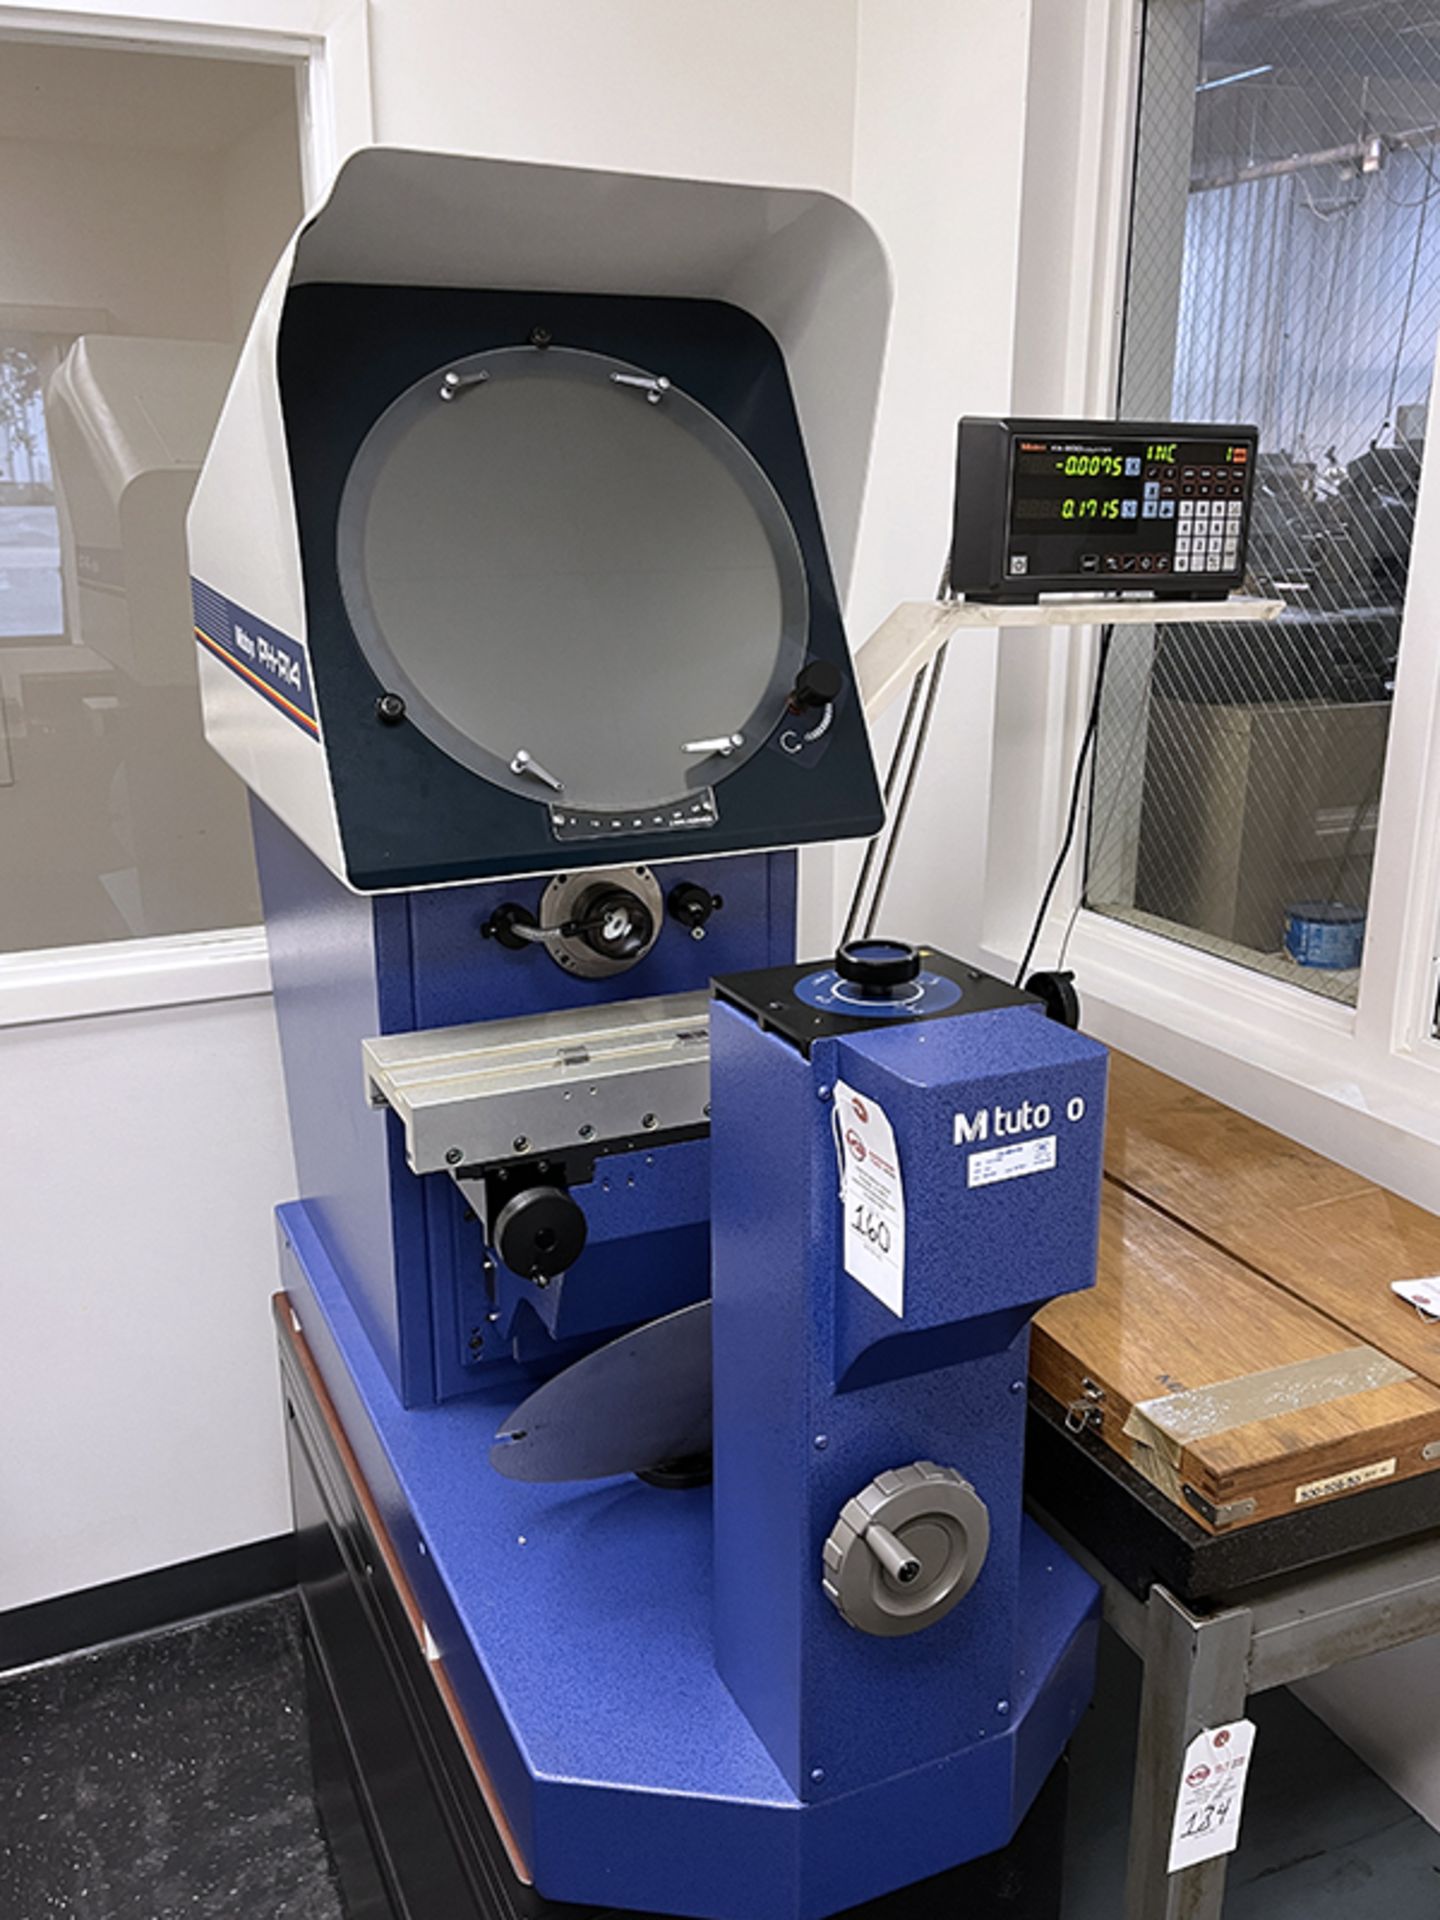 16" Mitutoyo PH-A14 Optical Comparator (2015)